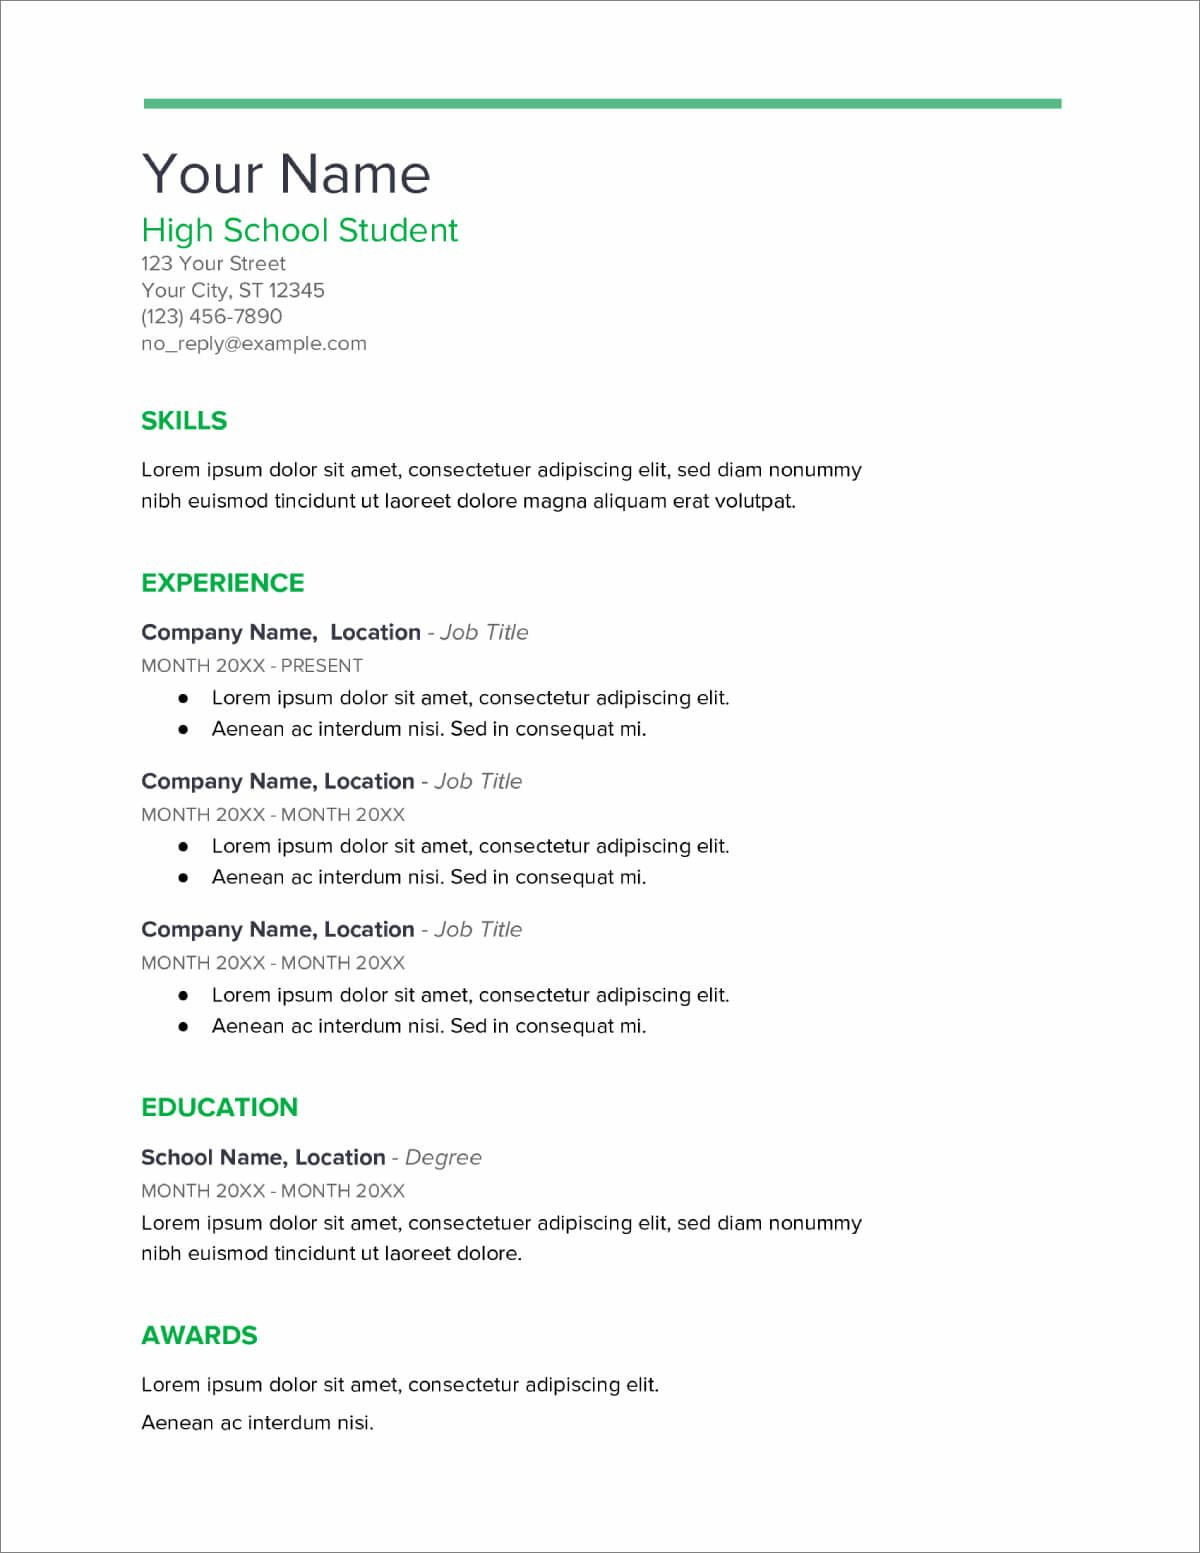 Template Resume for High School Student 20lancarrezekiq High School Resume Templates [download now]